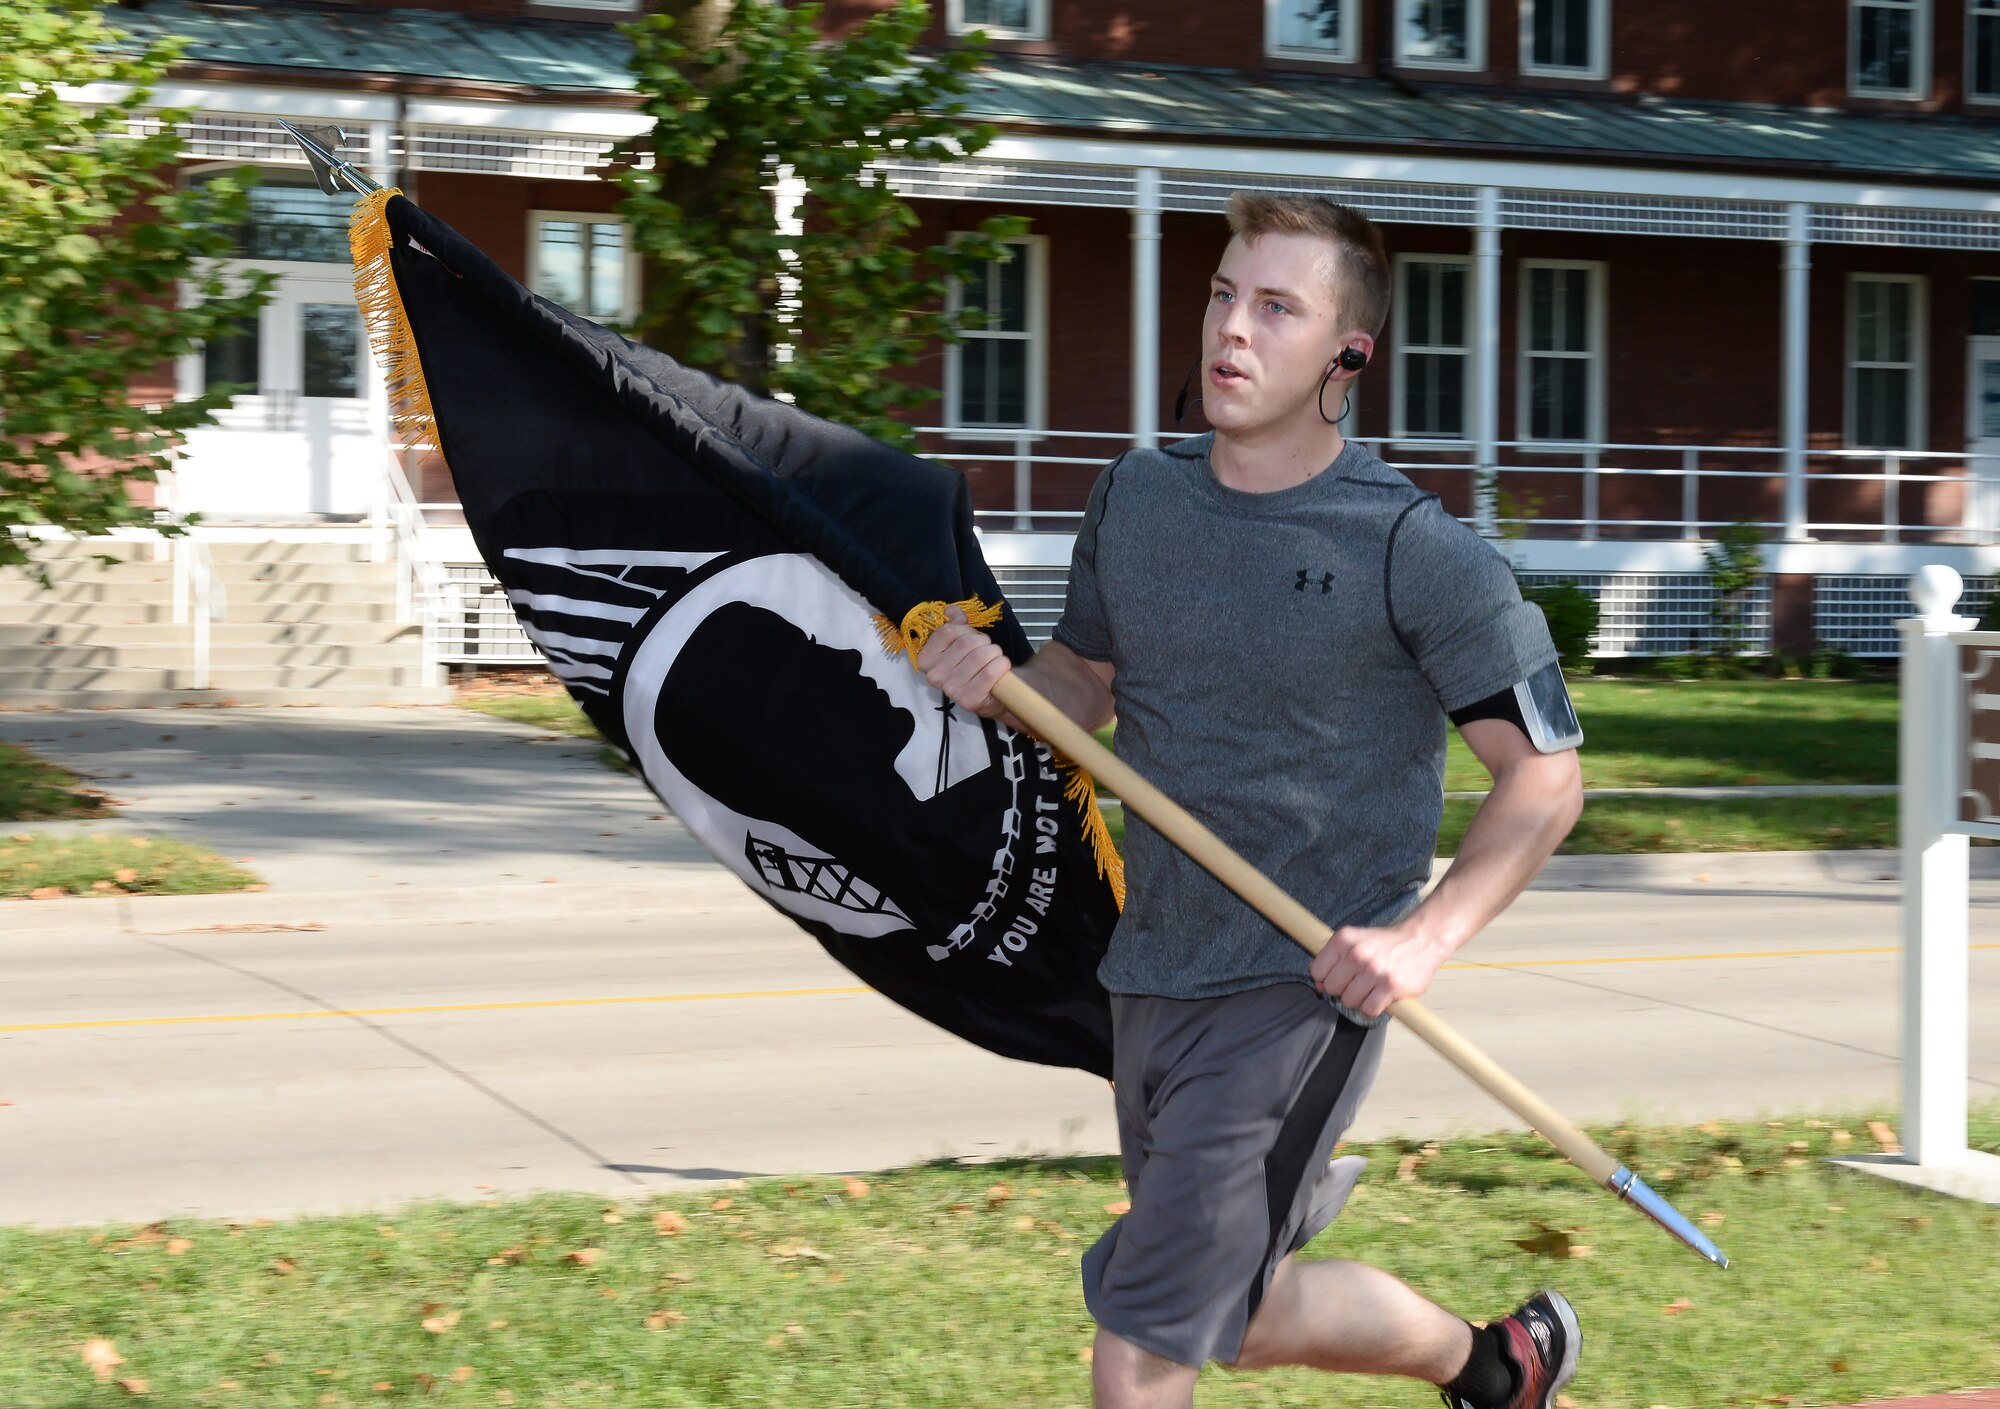 U.S. Air Force Staff Sgt. Matthew Green, 373rd Training Squadron instrument flight control systems instruction, carries the POW/MIA flag during the POW/MIA l 24-Hour Vigil Run Sept. 14, 2018, at Offutt Air Force Base, Nebraska. The United States’ National POW/MIA Recognition Day is observed across the nation on the third Friday of September each year. (U.S. Air Force Photo by Charles J. Haymond)